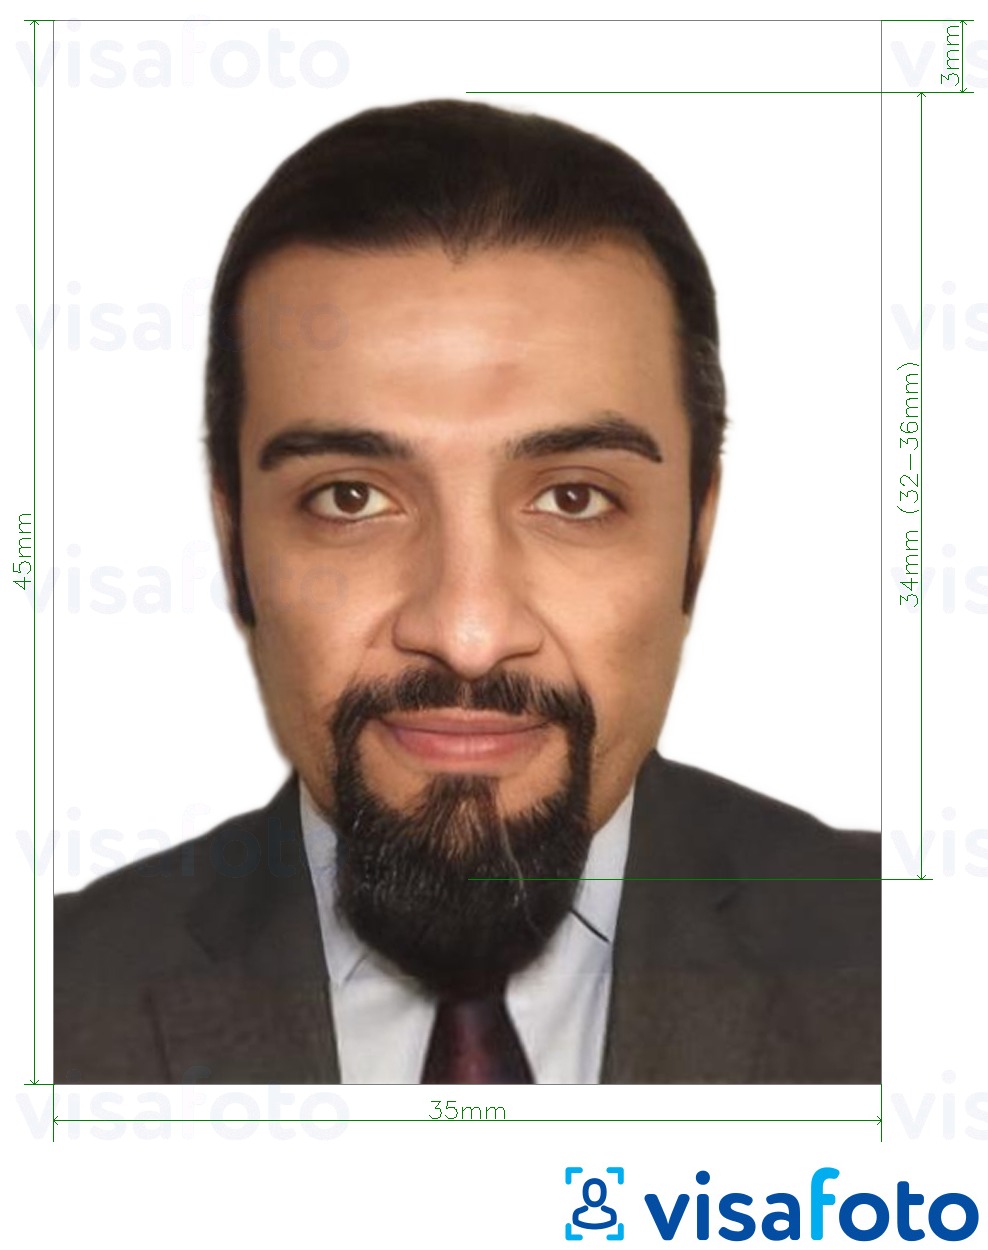 Example of photo for Lebanon passport 3.5x4.5 cm (35x45 mm) with exact size specification